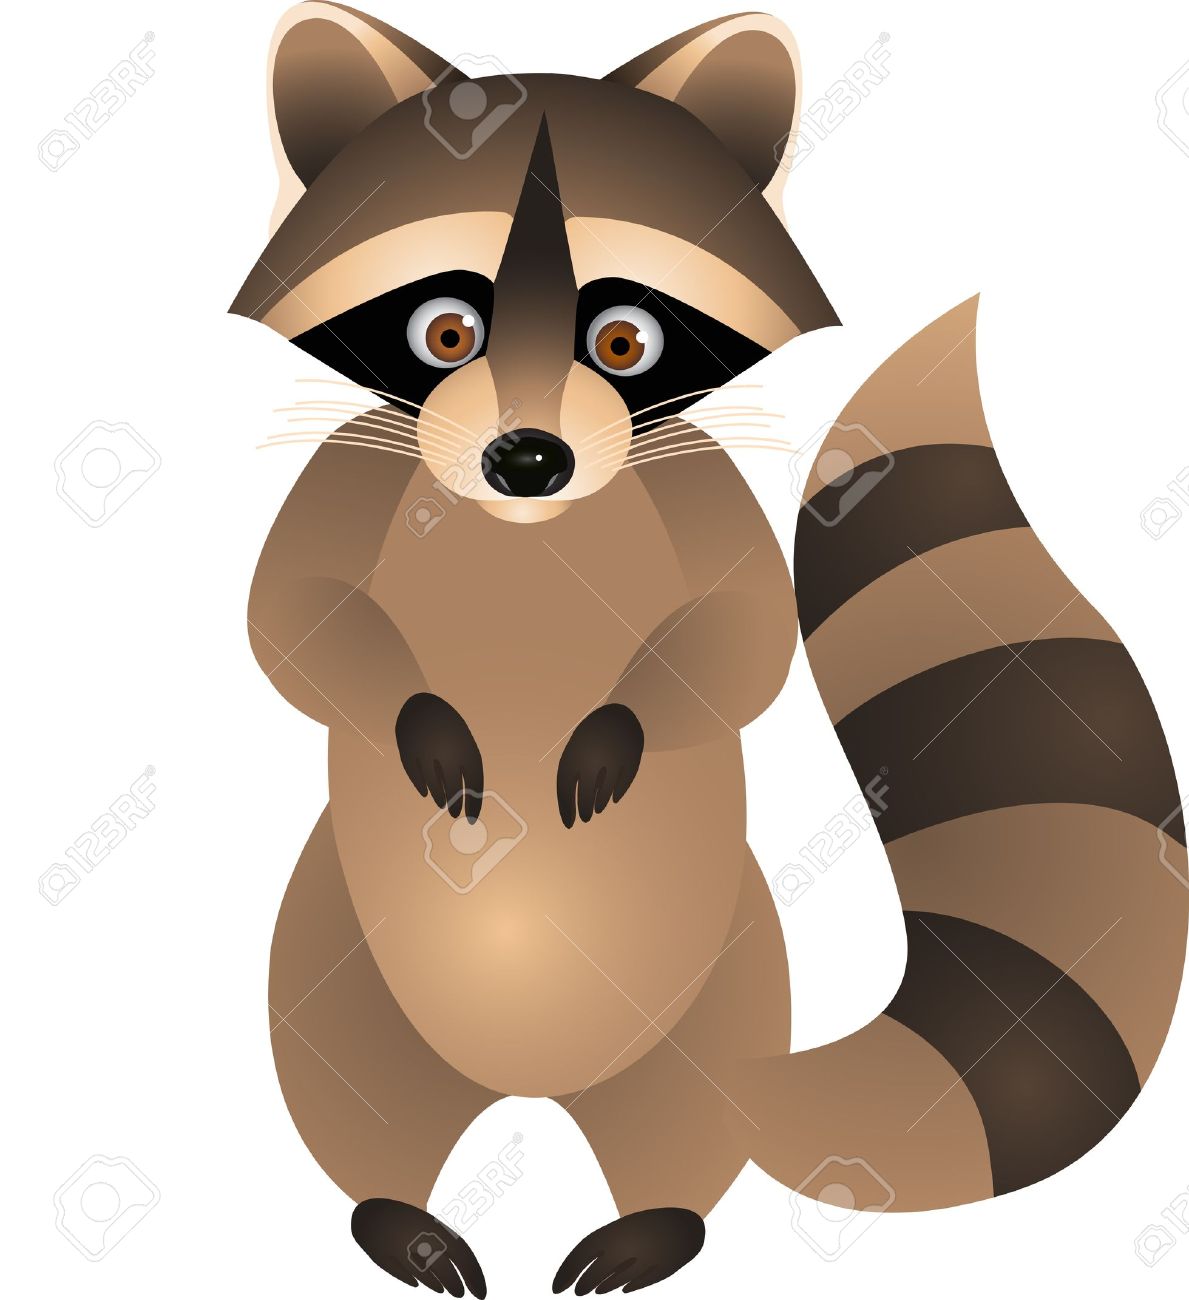 Racoon clipart #6, Download drawings